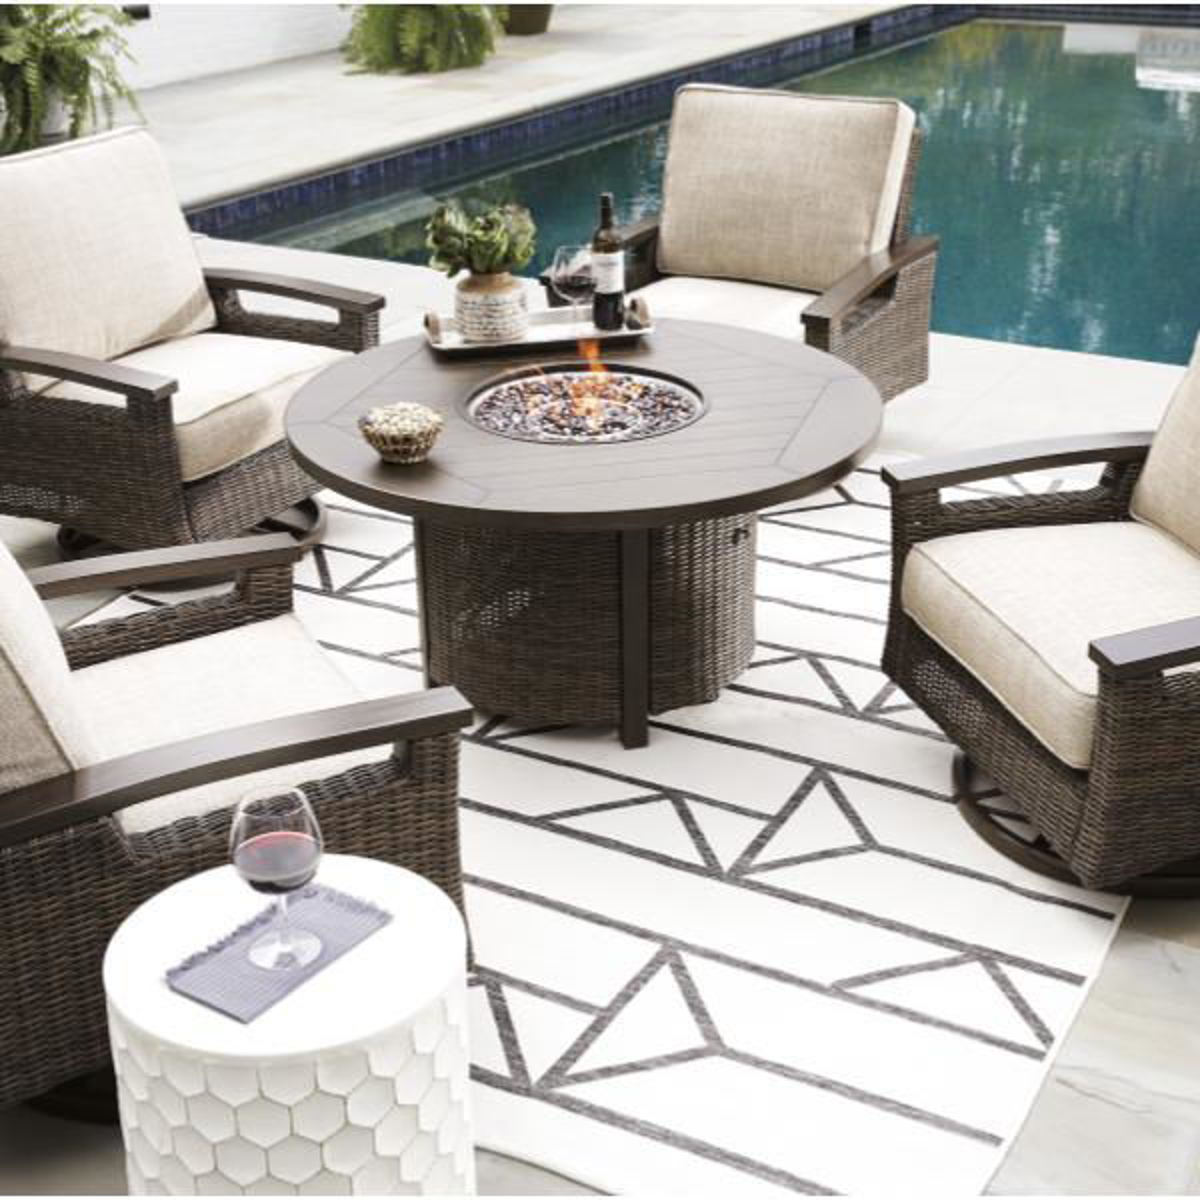 Picture of GRAYTON 48" RND FIRE PIT TABLE